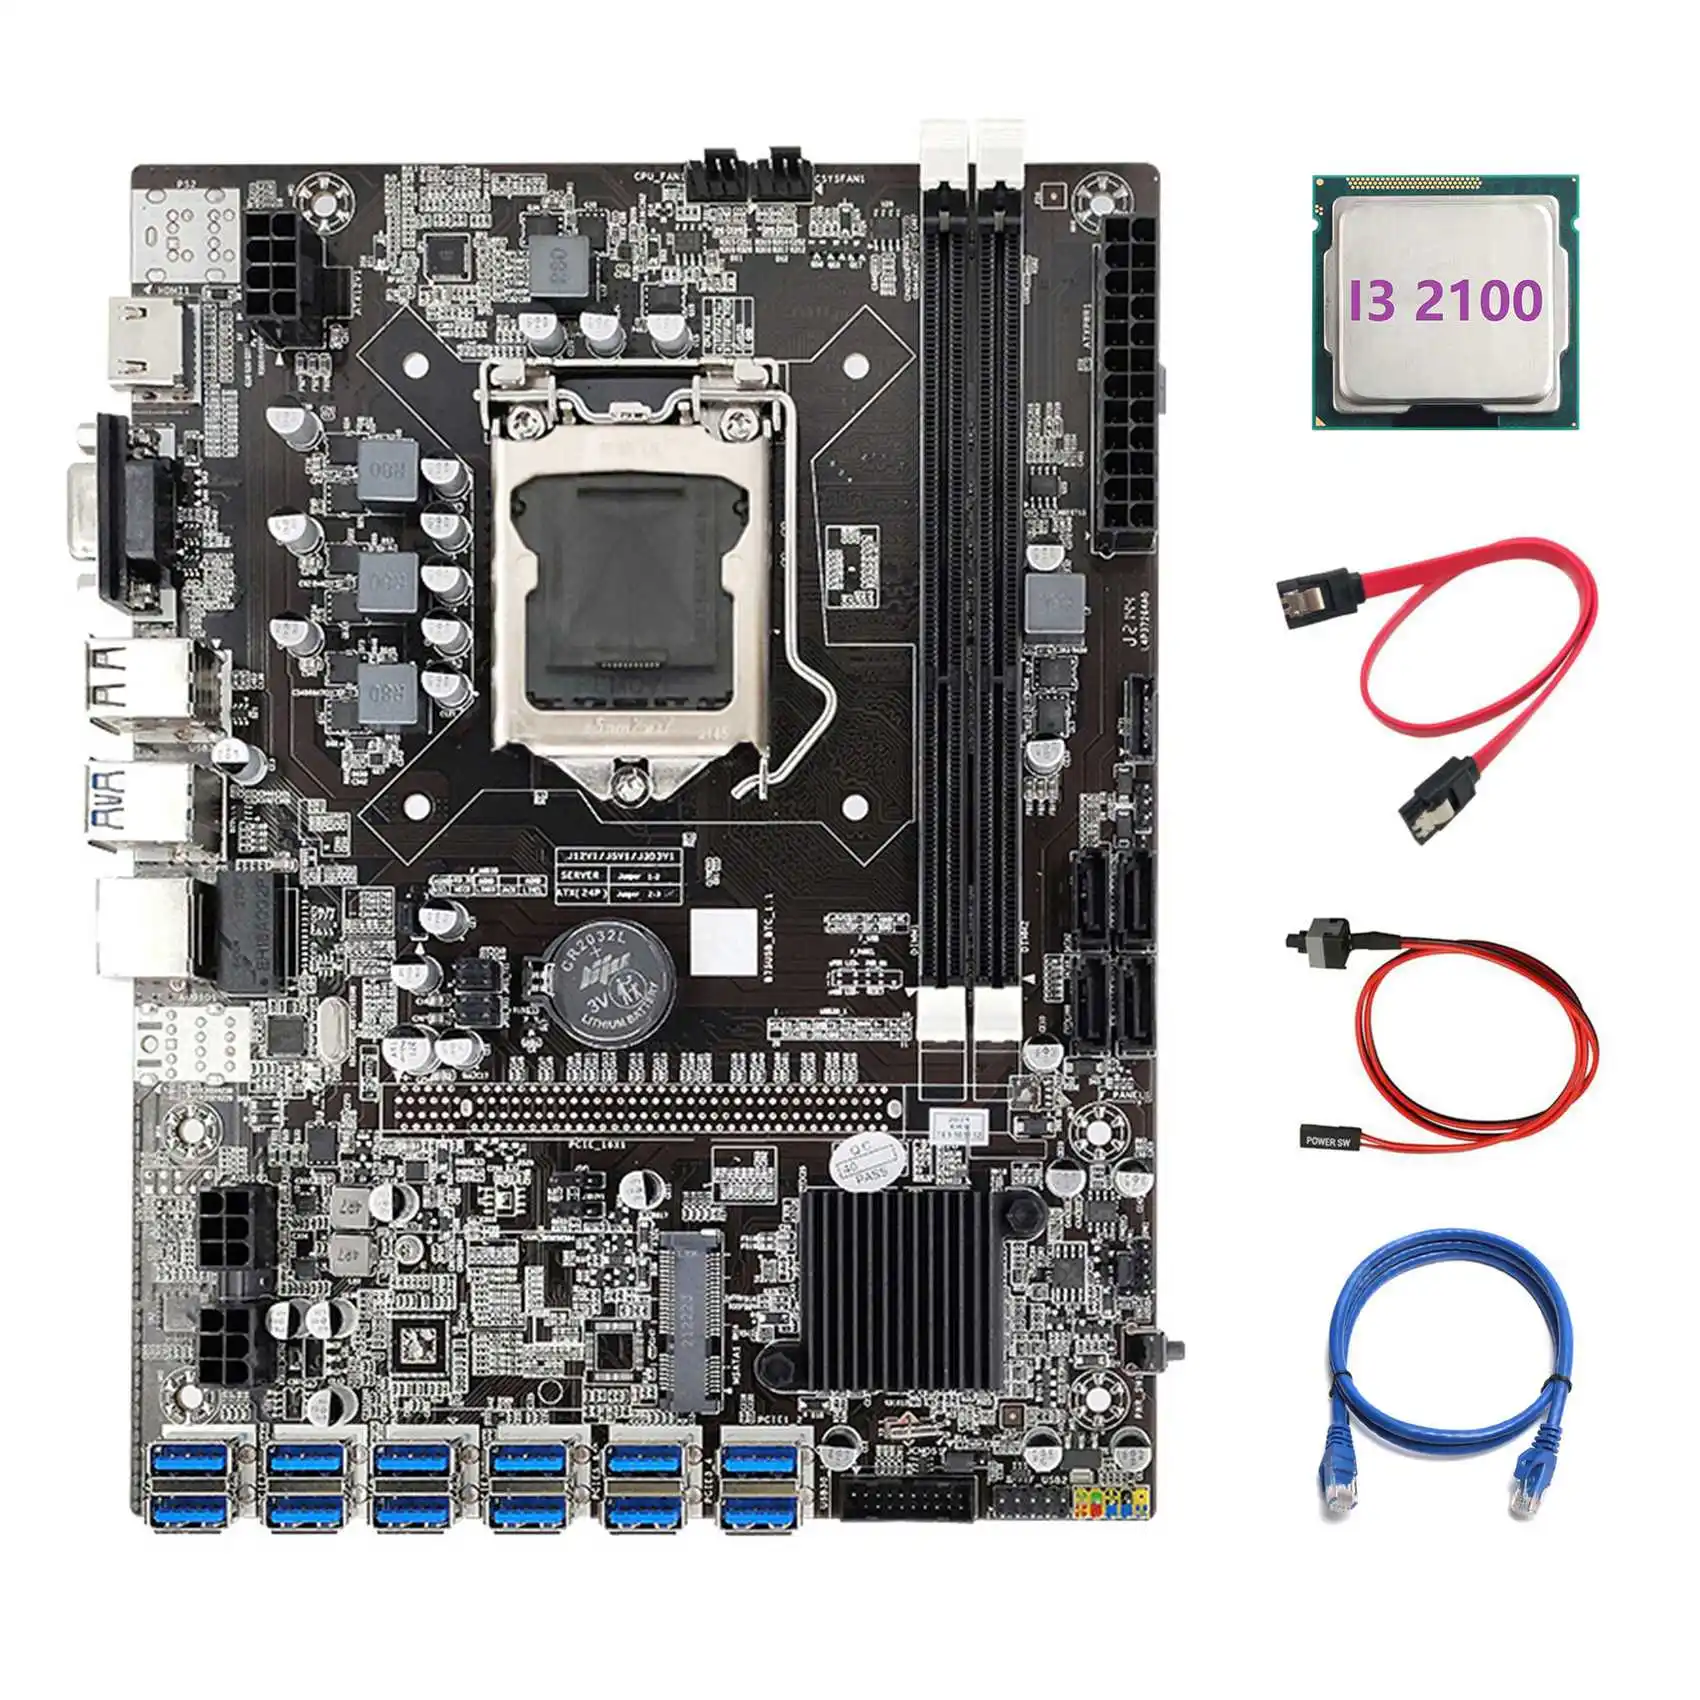 

B75 ETH Miner Motherboard 12 PCIE to USB3.0+I3 2100 CPU+RJ45 Network Cable+SATA Cable+Switch Cable LGA1155 Motherboard